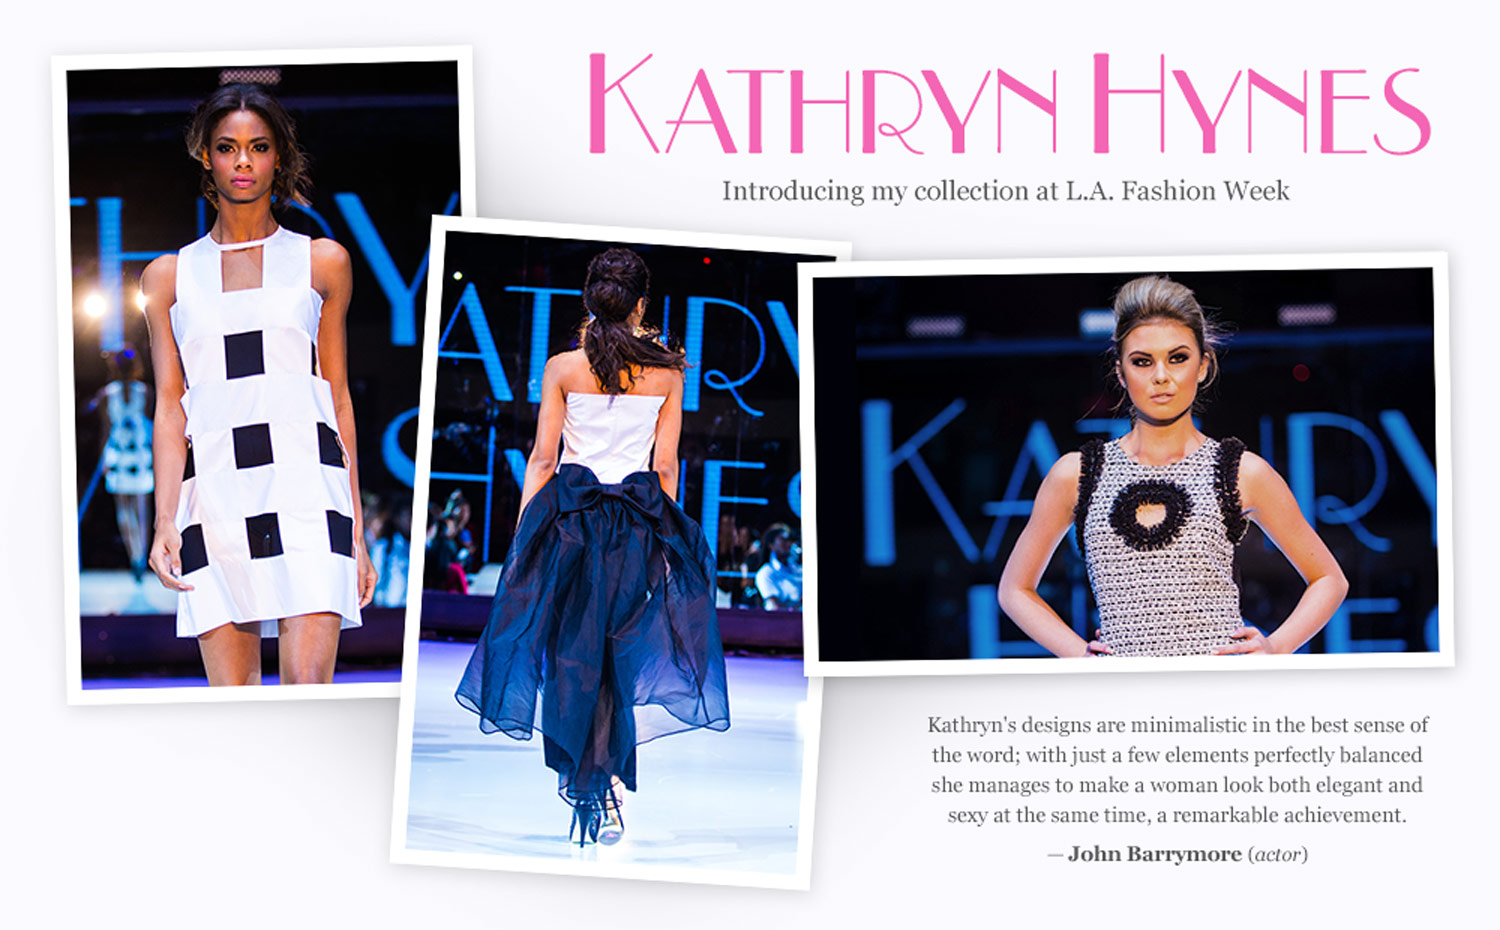 Kathryn Hynes Spring/Summer 2014 Collection